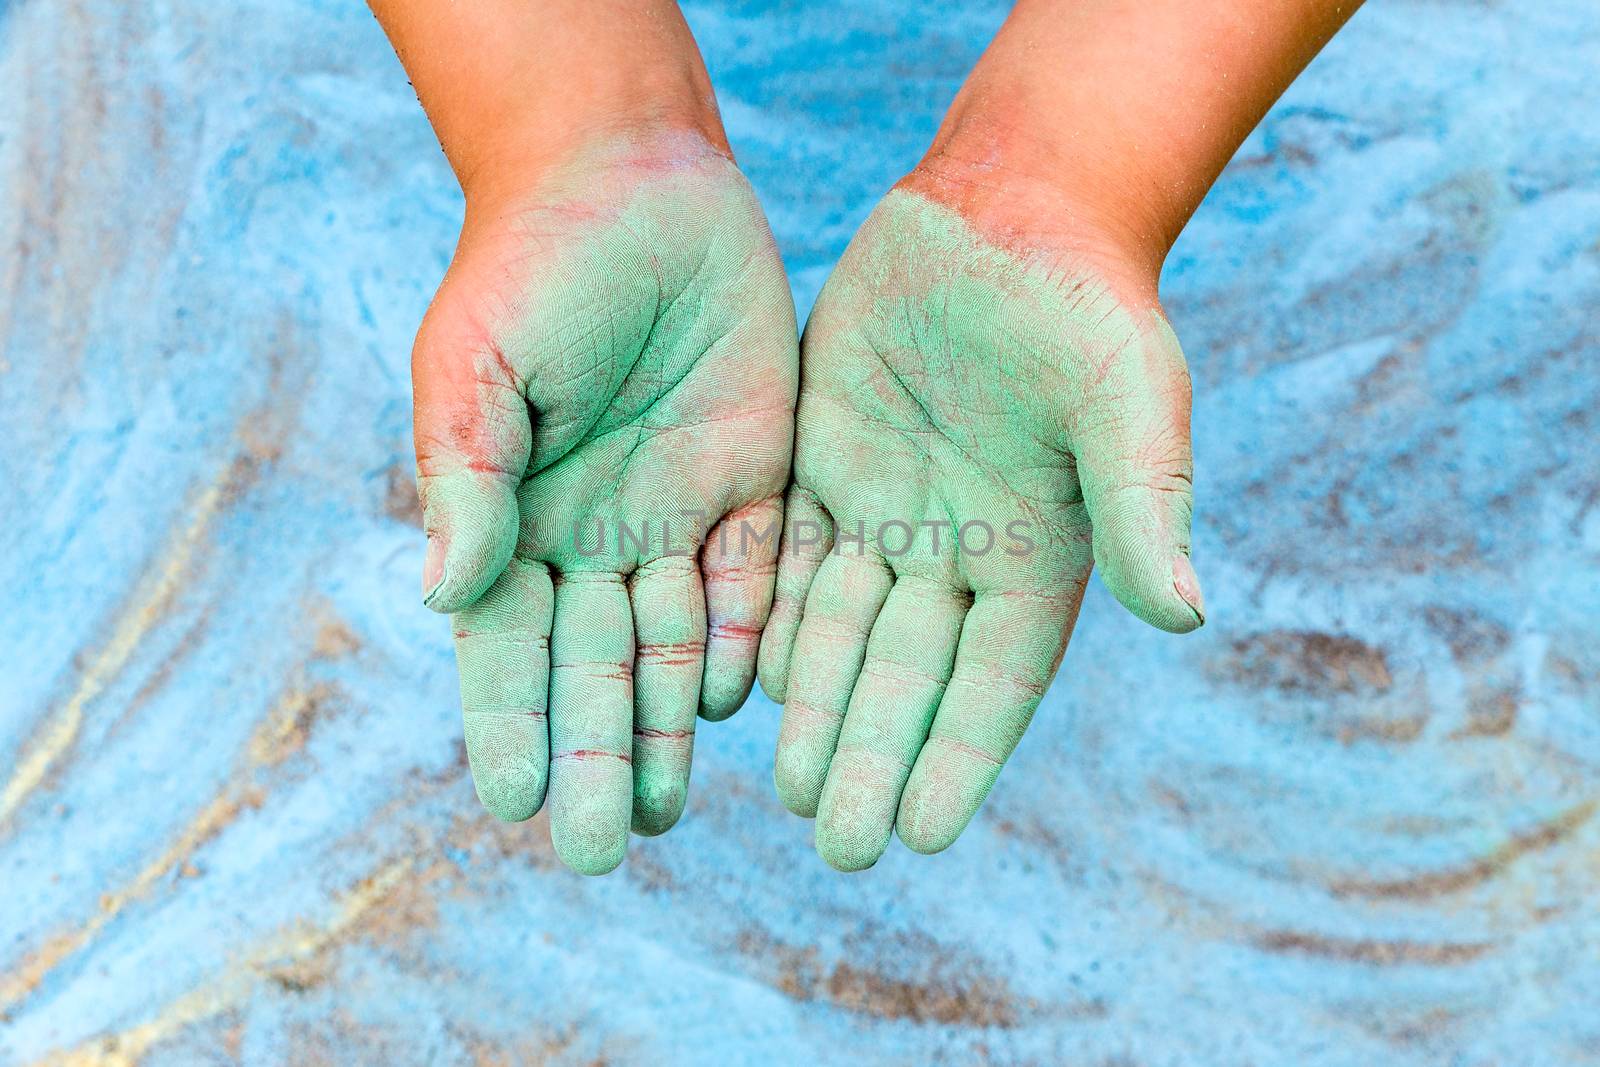 Child showing green hands with chalk by BenSchonewille